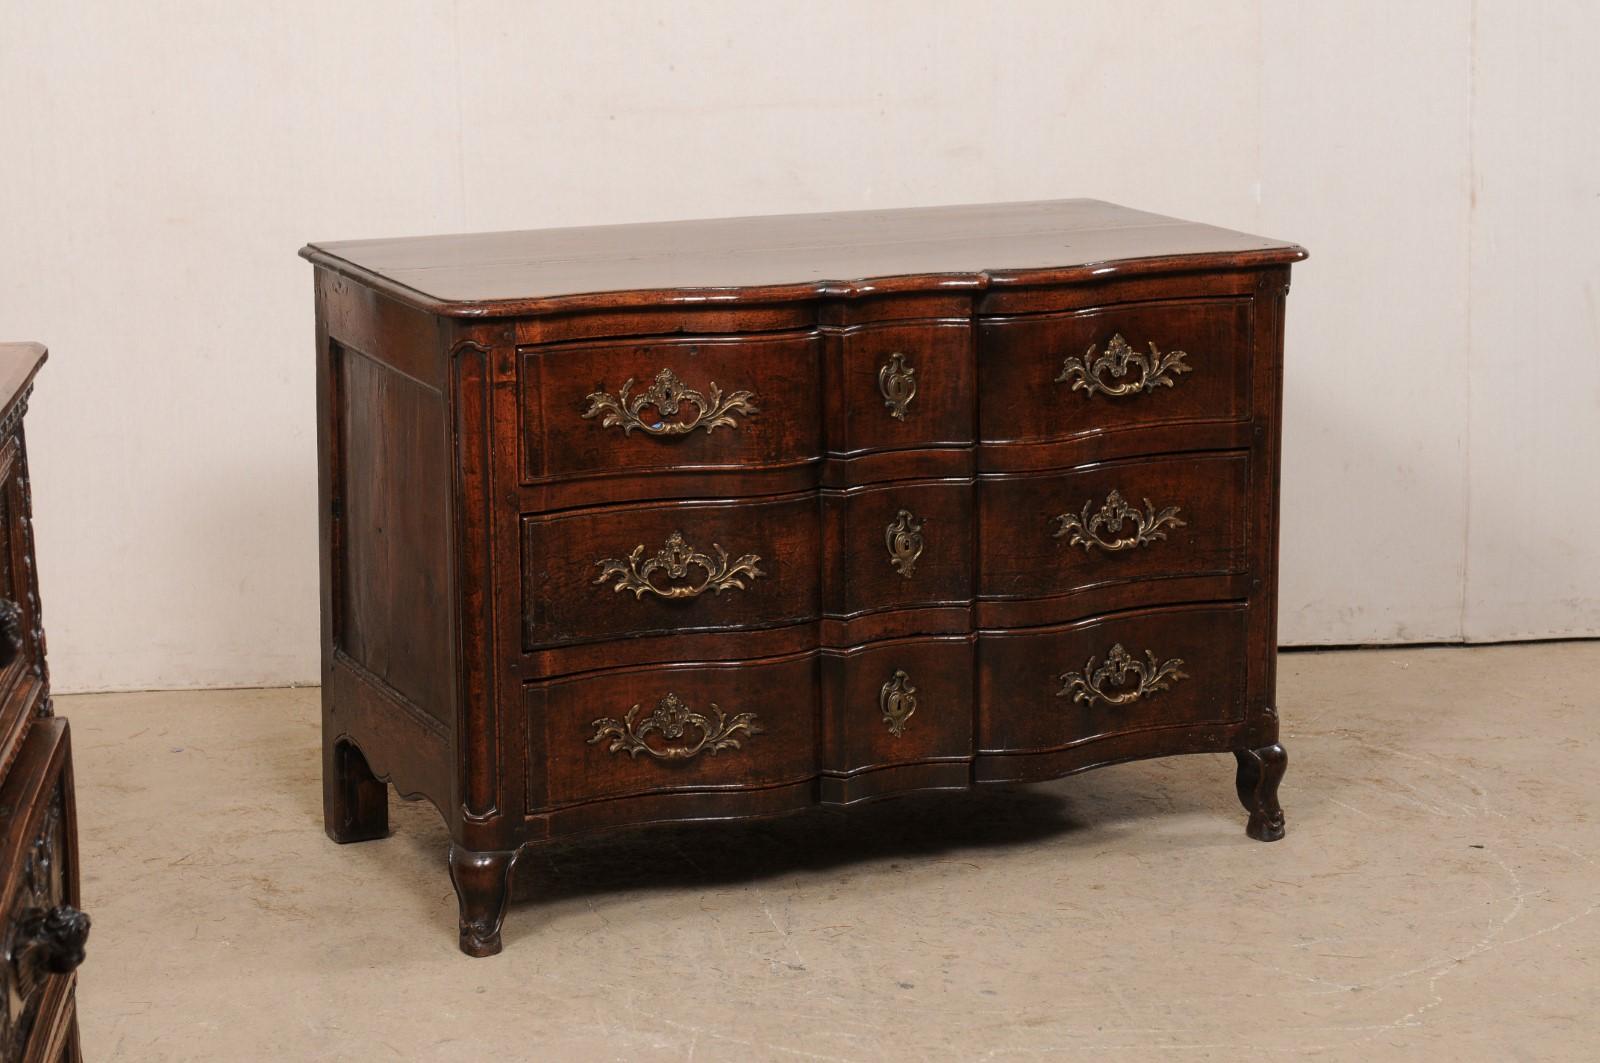 A French period rococo serpentine chest of drawers from the 18th century. This antique commode from France features a rectangular shaped top, with softly-rounded corners and serpentine front lines, which mimic the movement of the case beneath. The